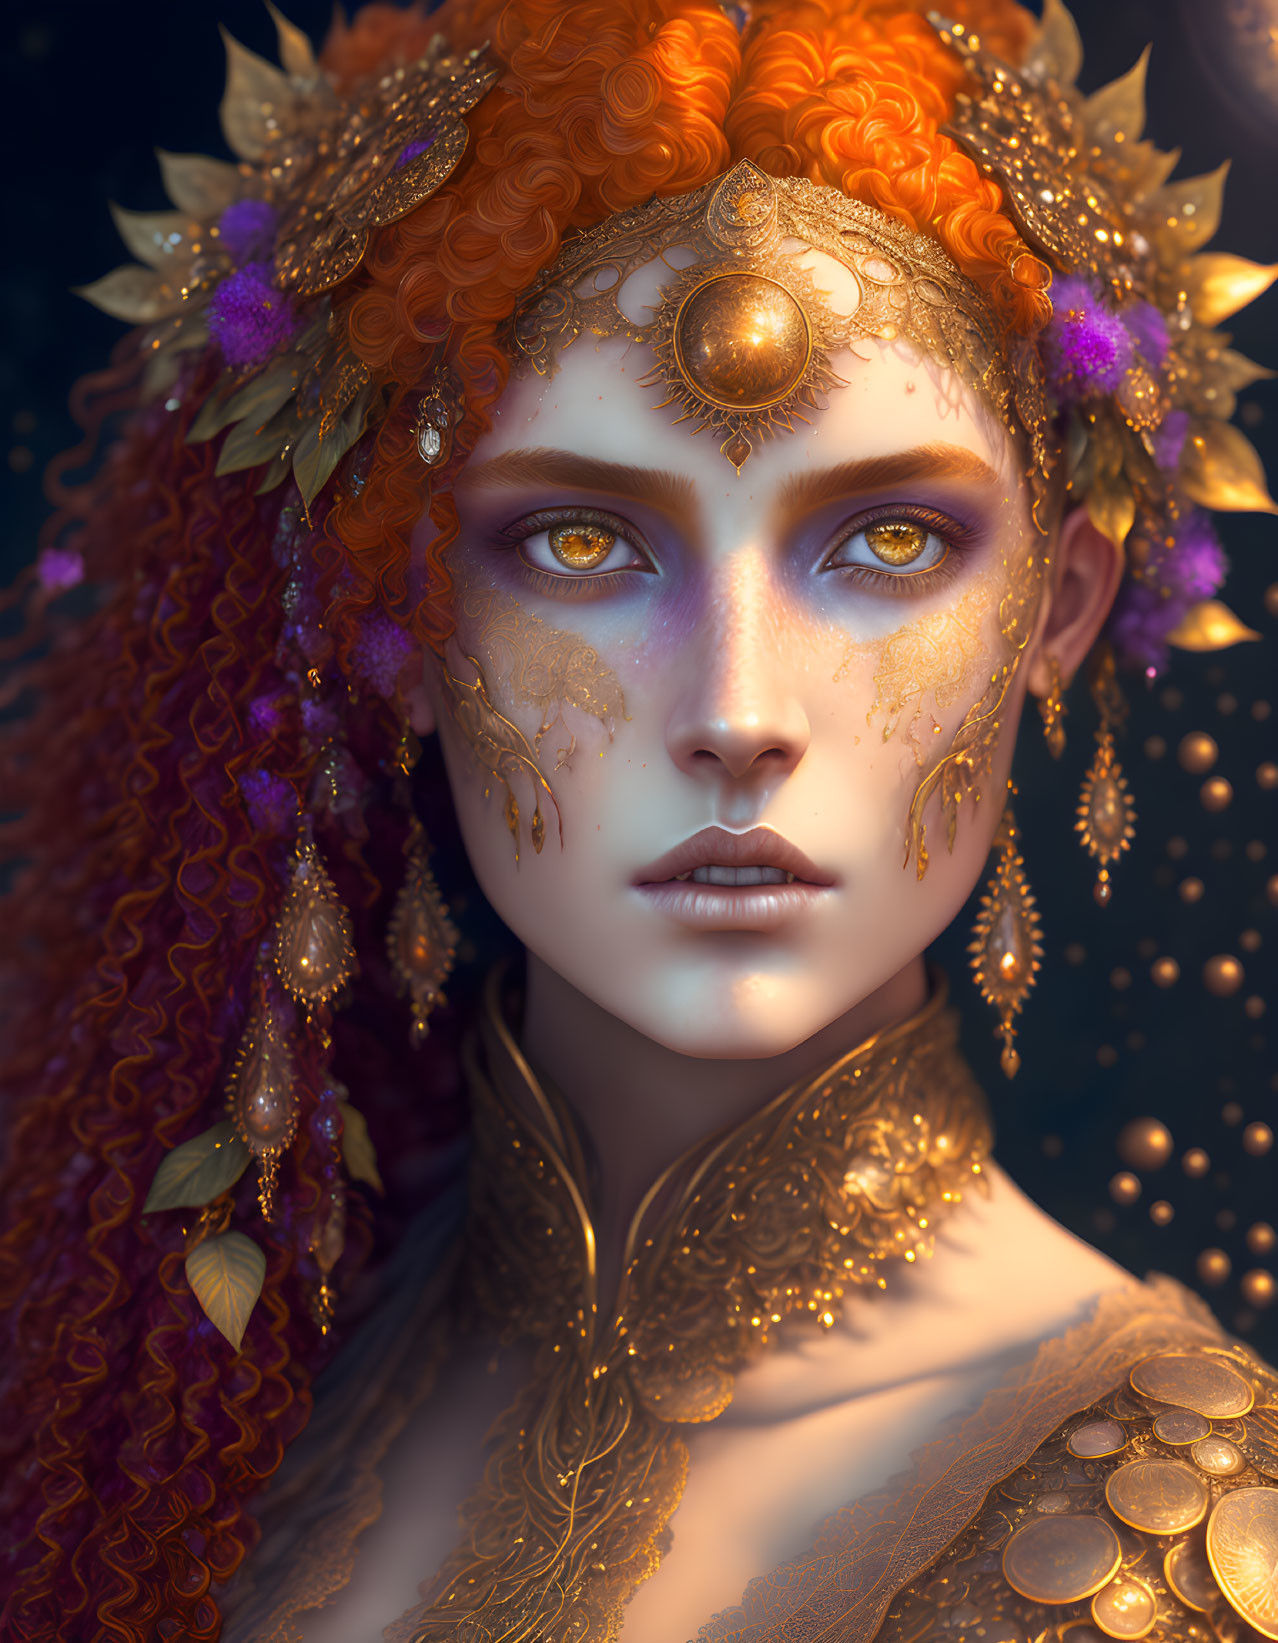 Vibrant digital portrait of a woman with ornate gold jewelry and orange hair